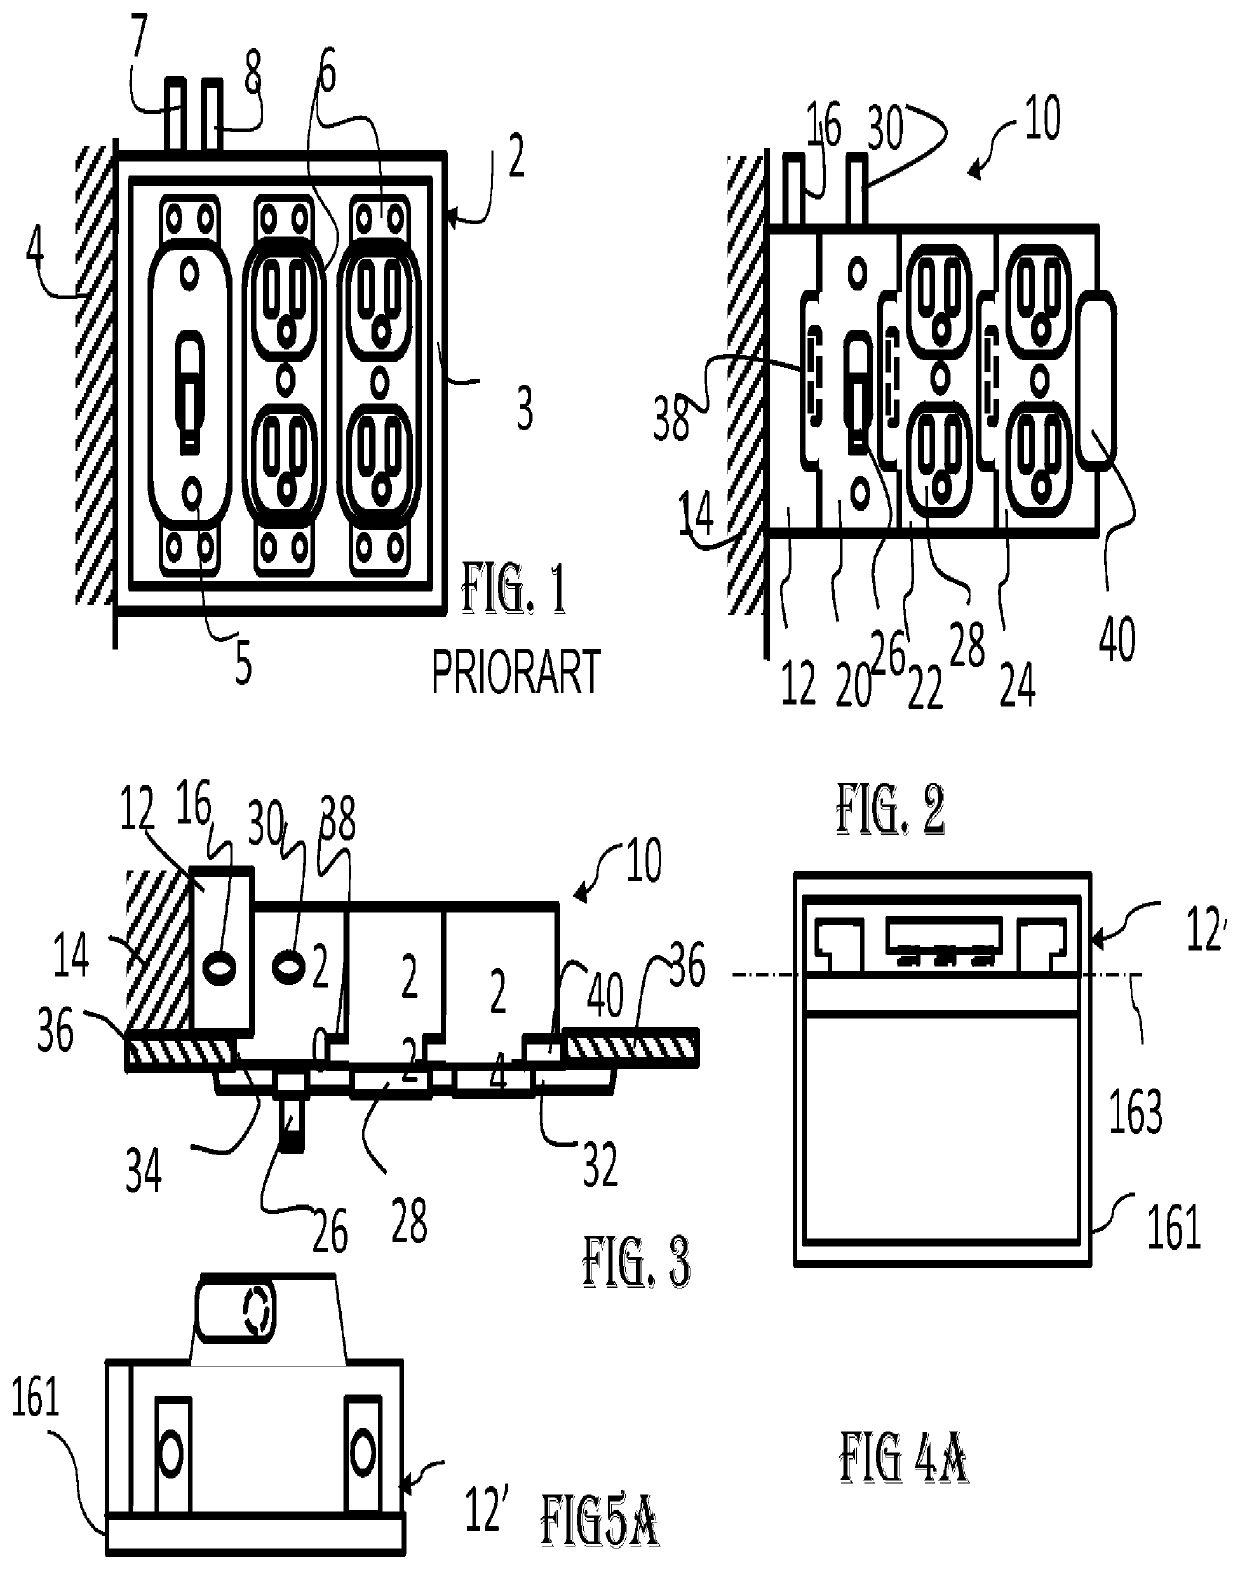 Modular Electrical Wiring System and Methods Therefor